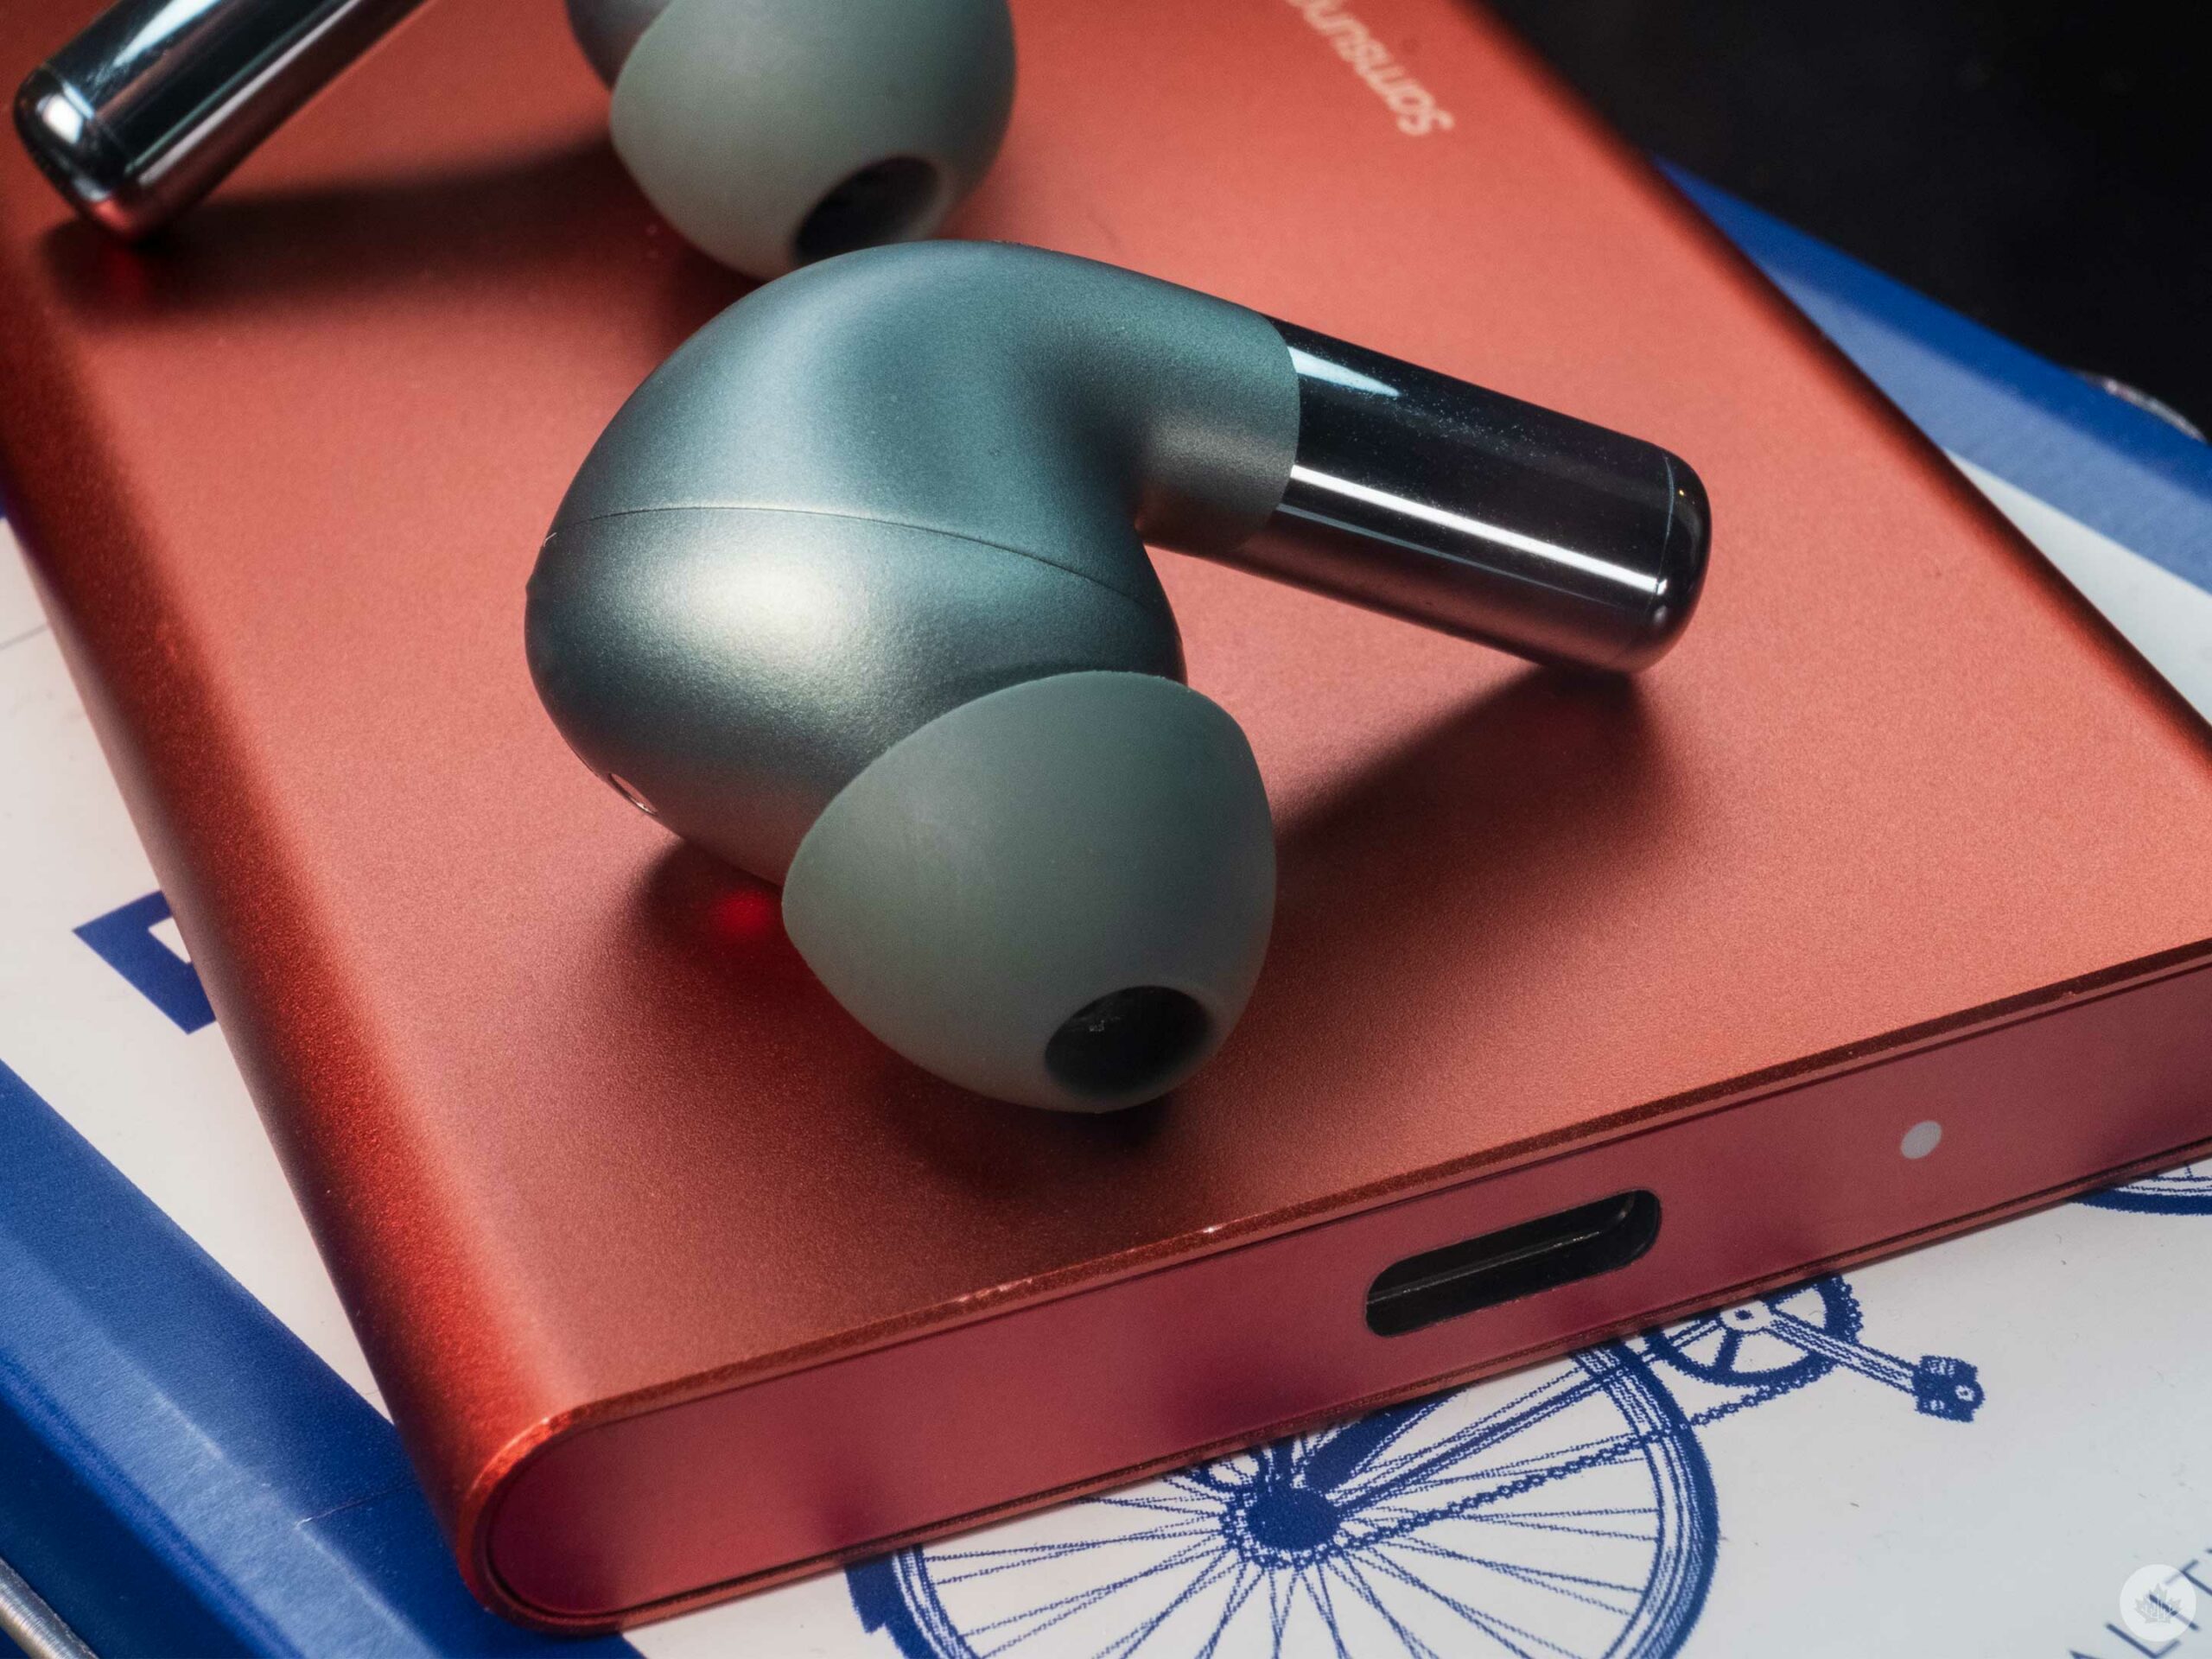 OnePlus Buds Pro 2 review: Buy these for the bassy sound, not the